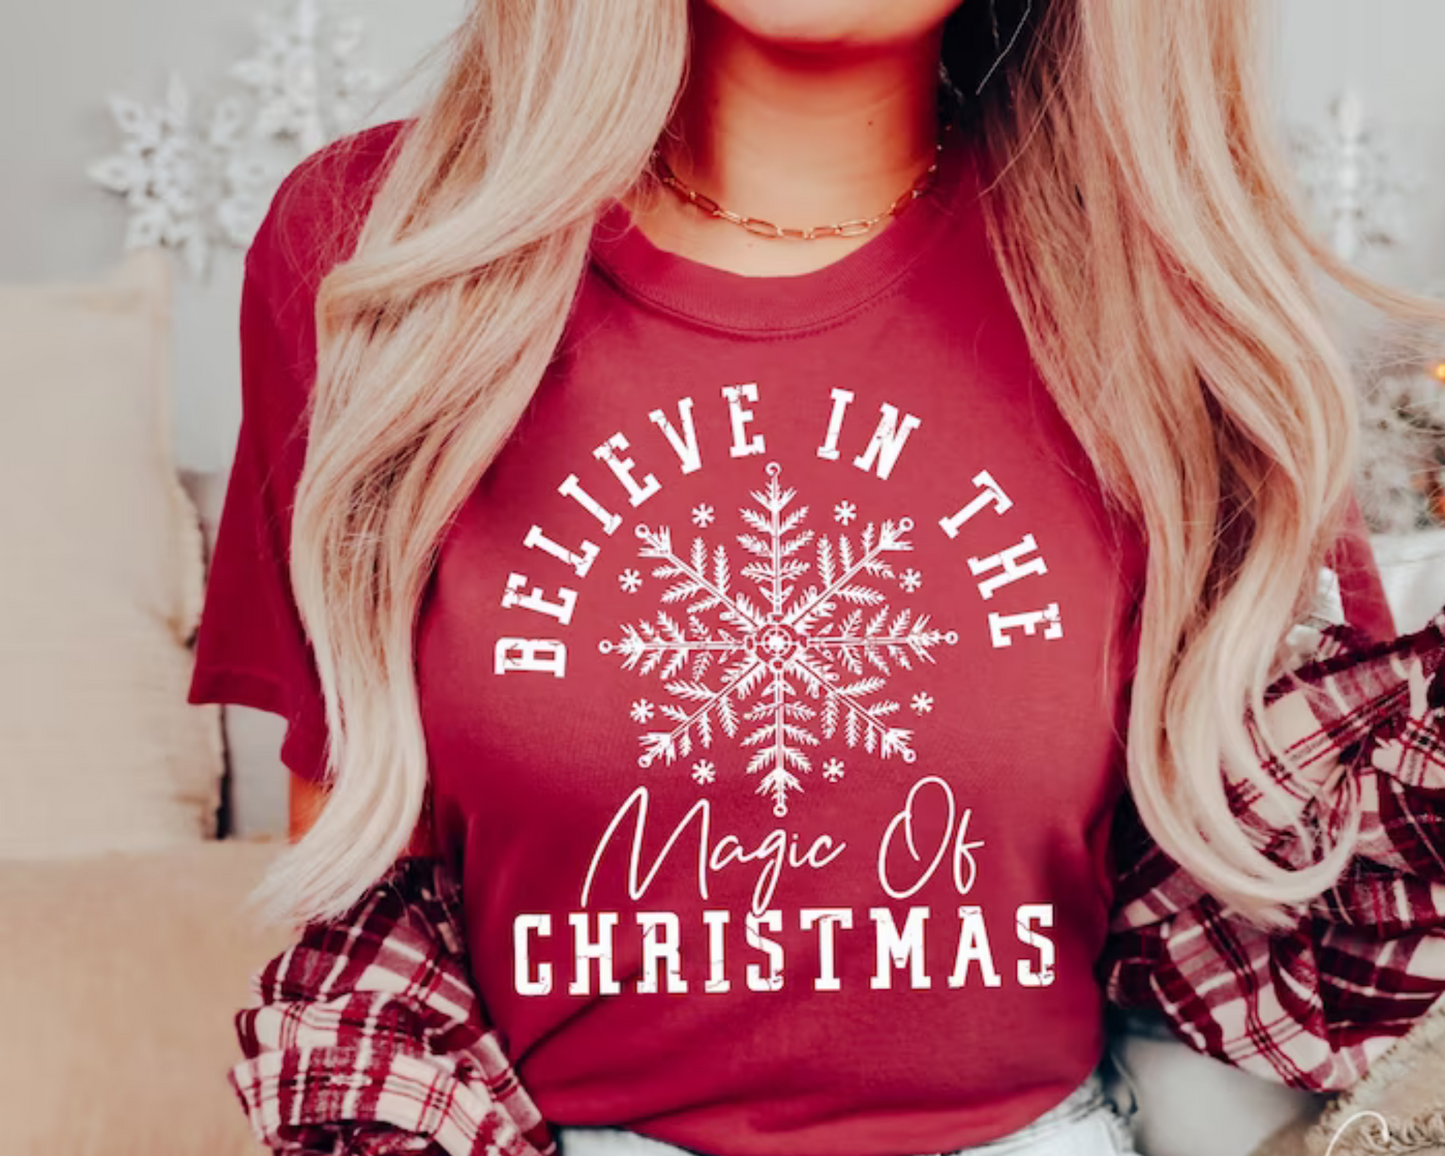 Believe in the Magic of Christmas